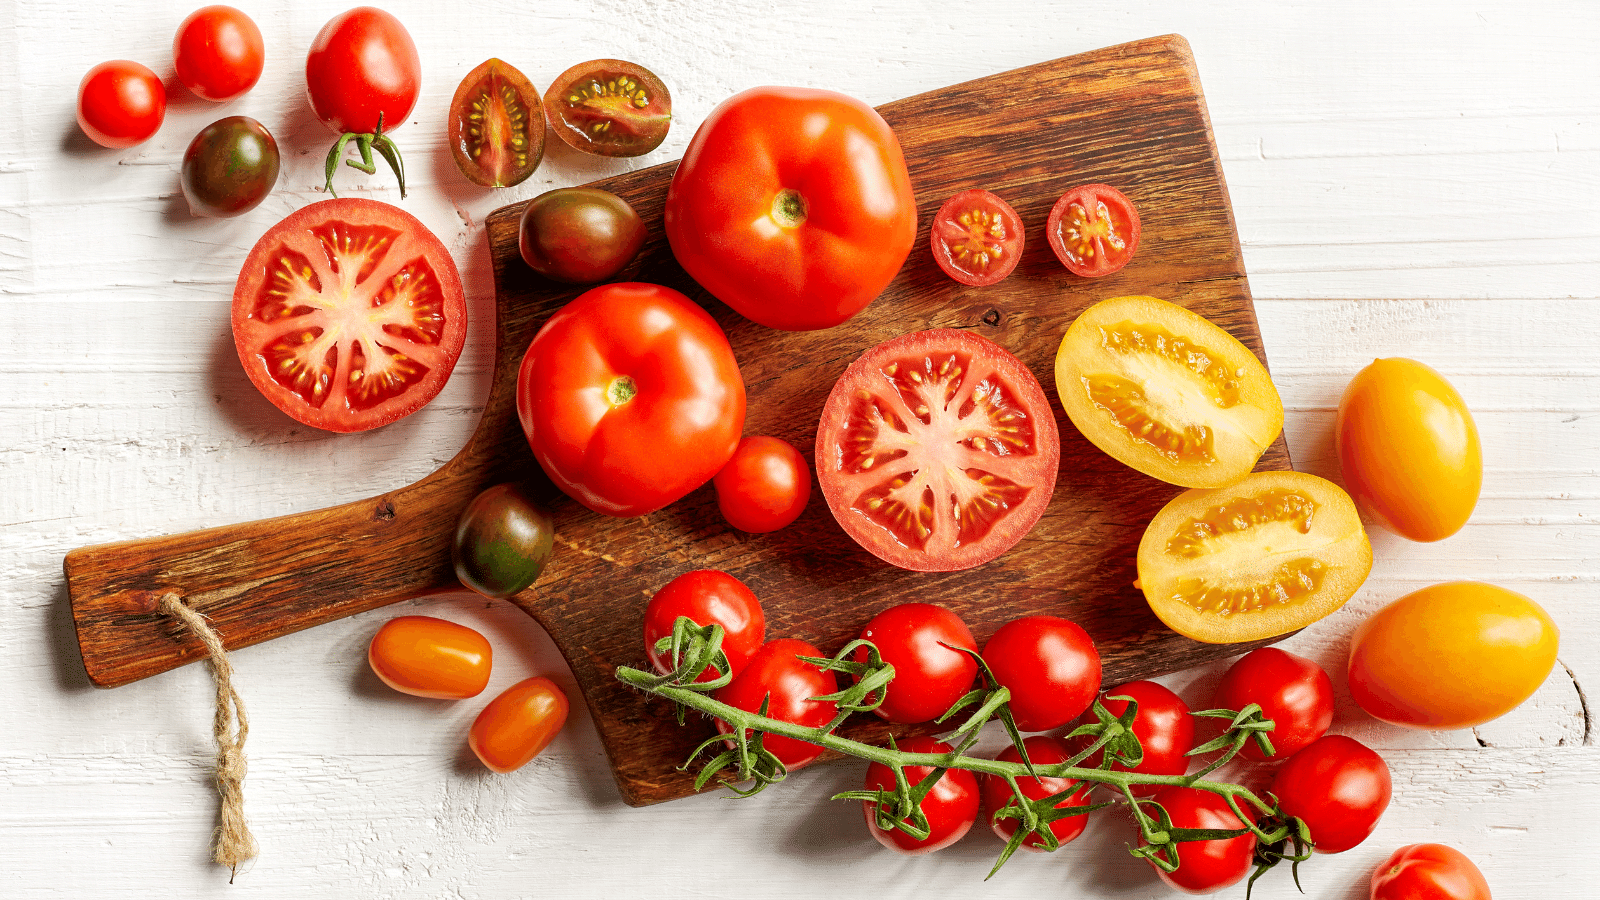 Variety of tomatoes.